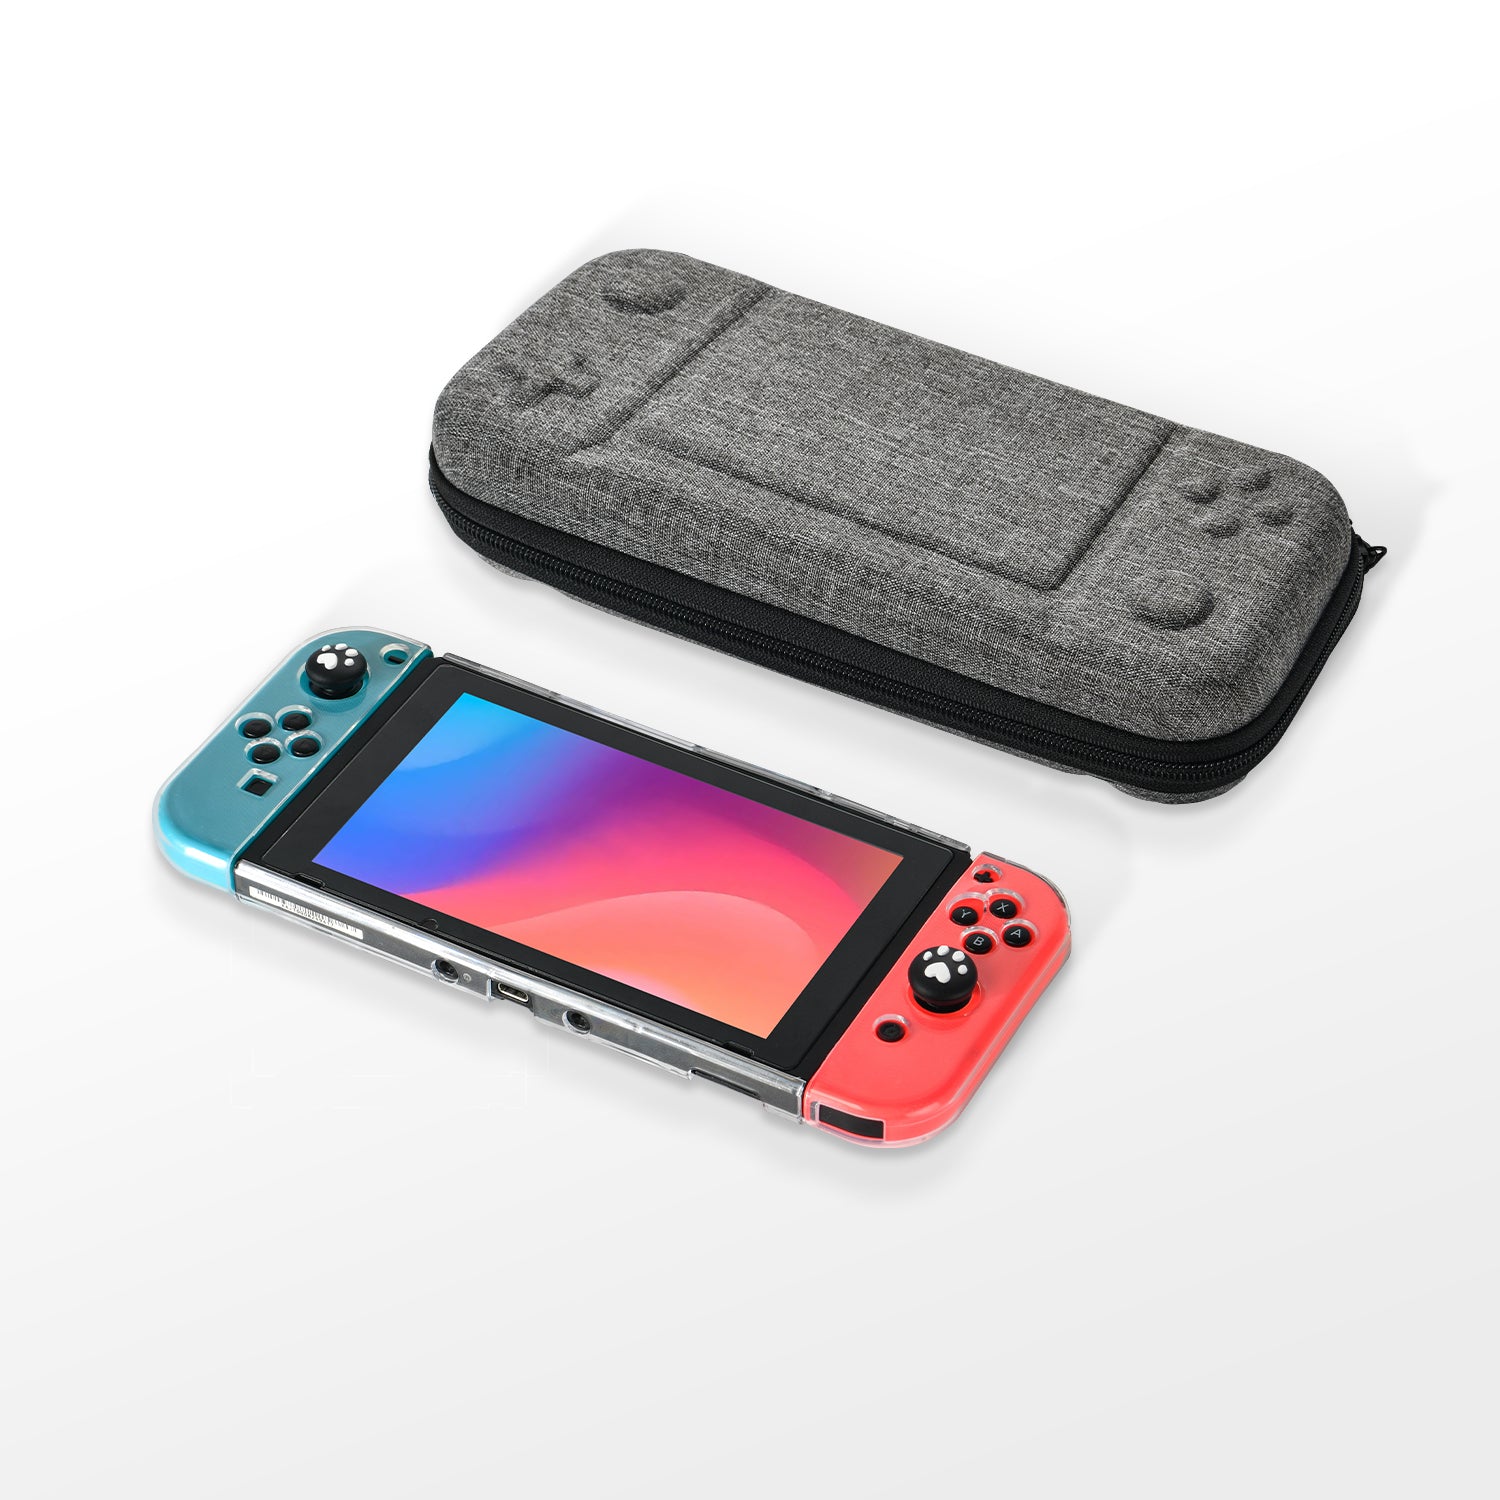 Younik Button Design Nintendo Switch Travel Case, Protective Switch Case, Switch Accessories